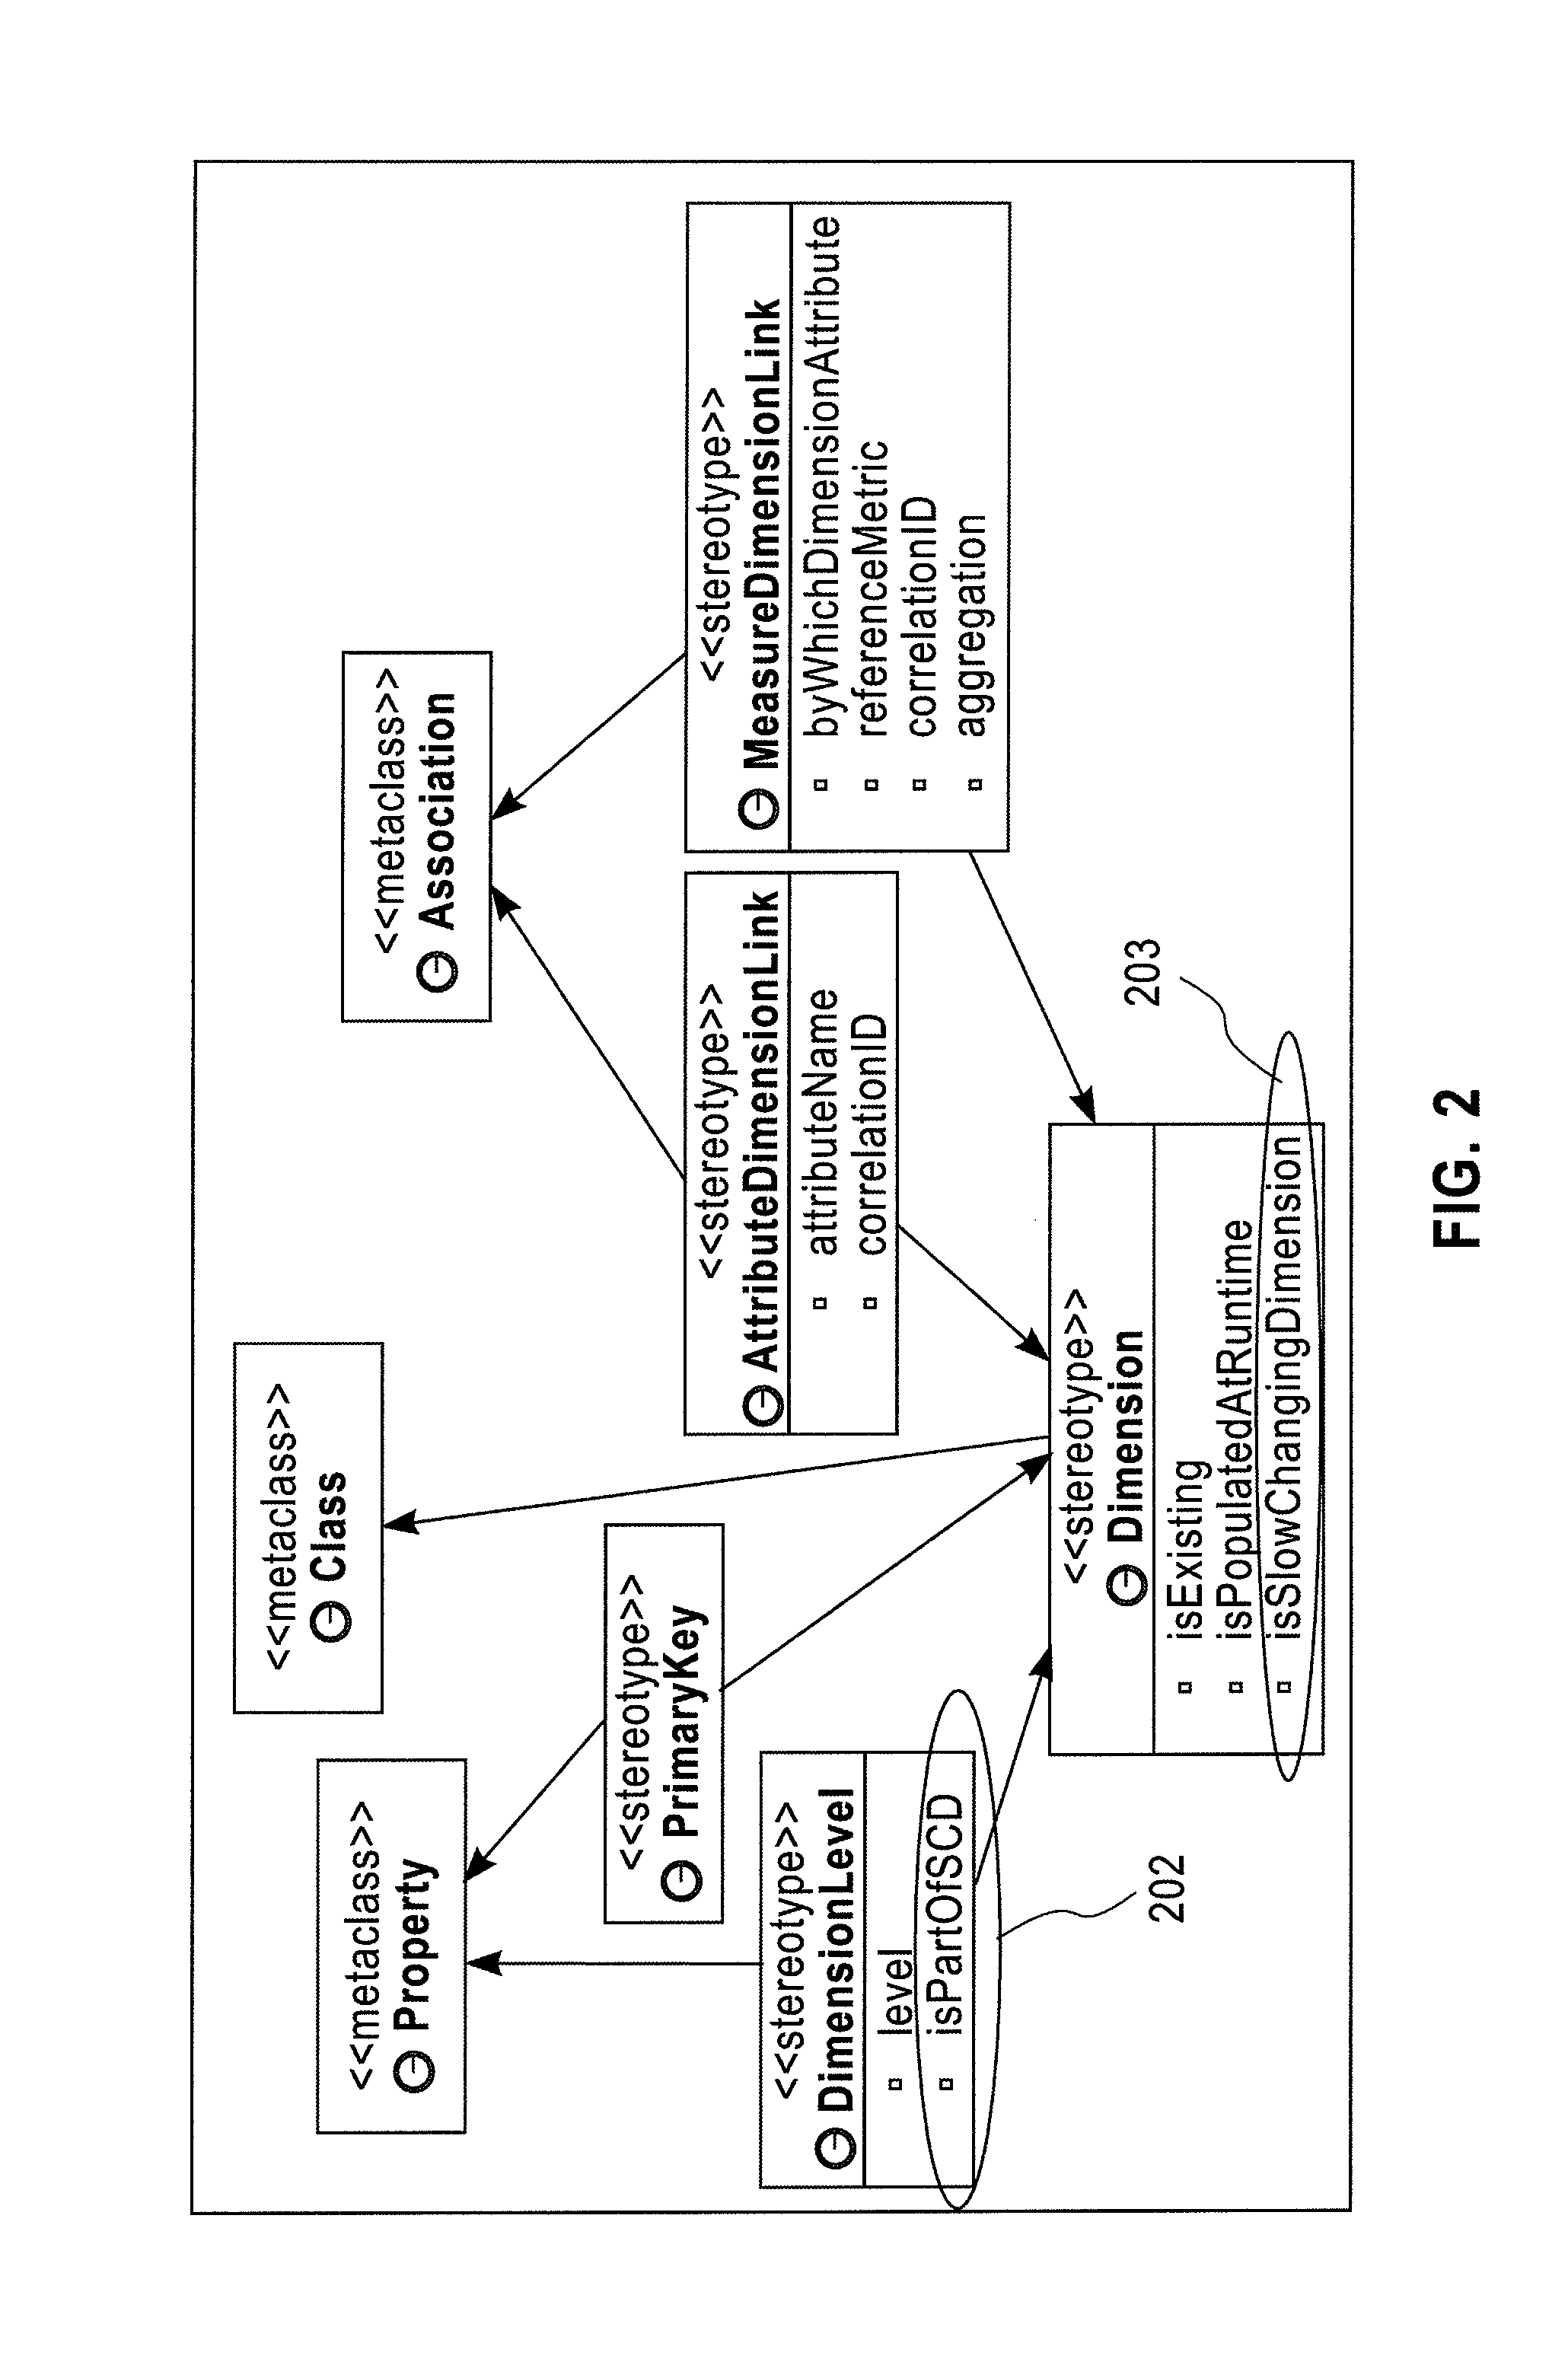 System and method for modeling slow changing dimension and auto management using model driven business performance management